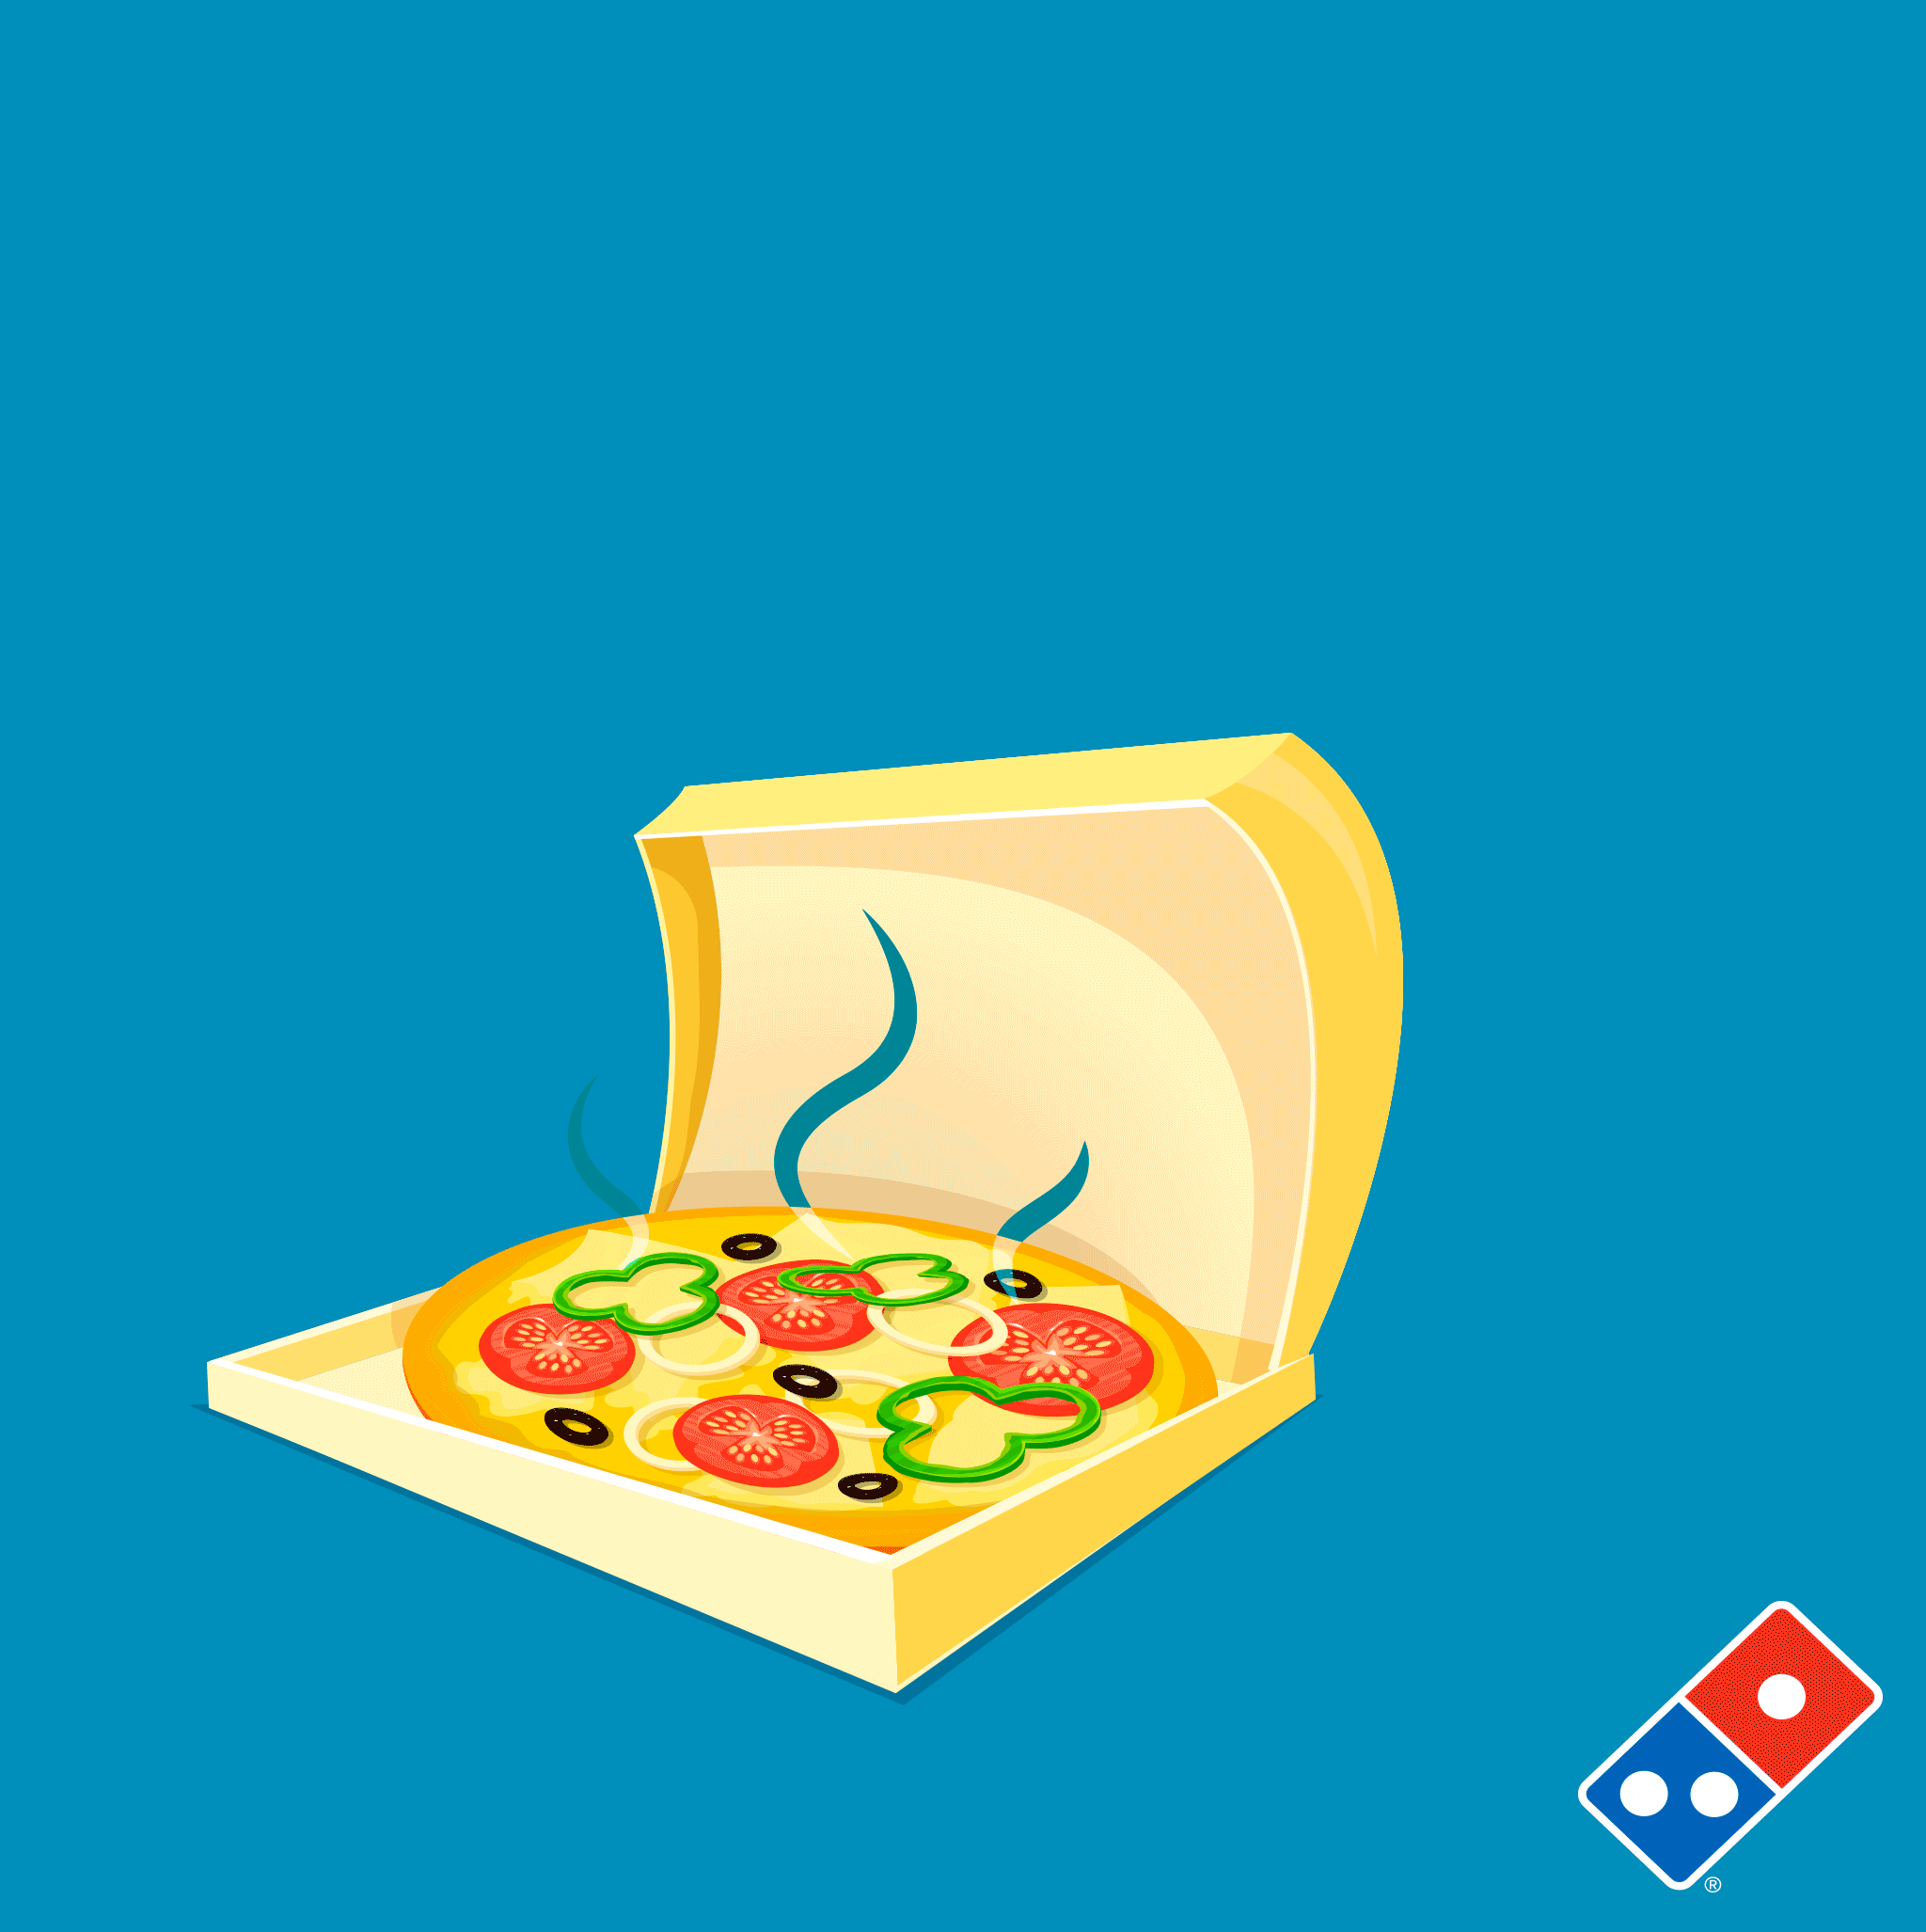 Pizza dominos dominospizza GIF - shared by Kagaktilar on GIFER